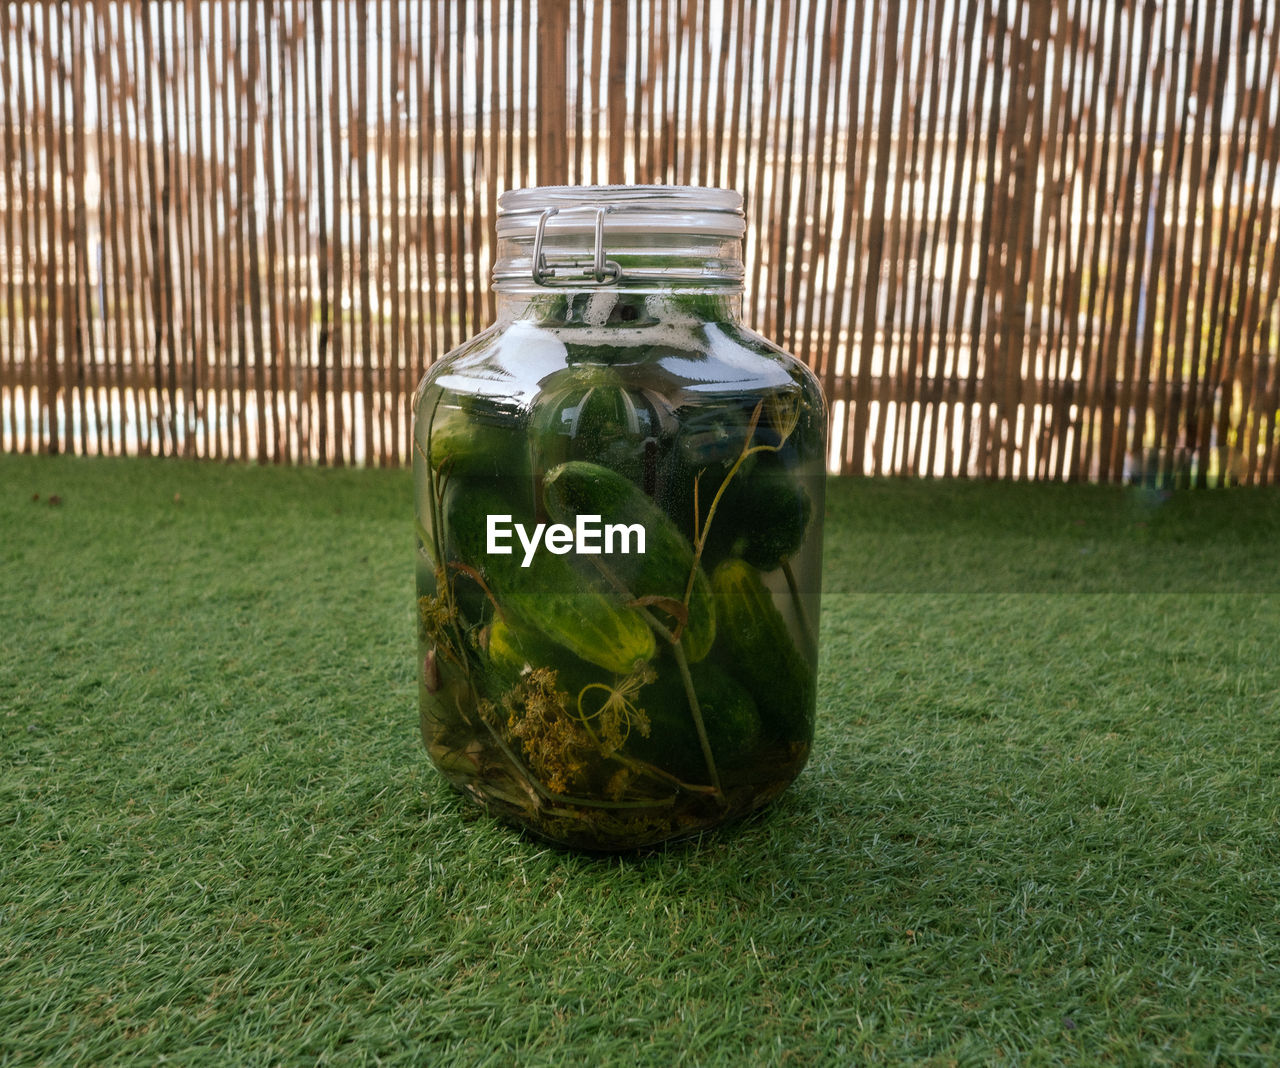 Pickled cucumbers in a closed jar standing on the green grass, blurred background